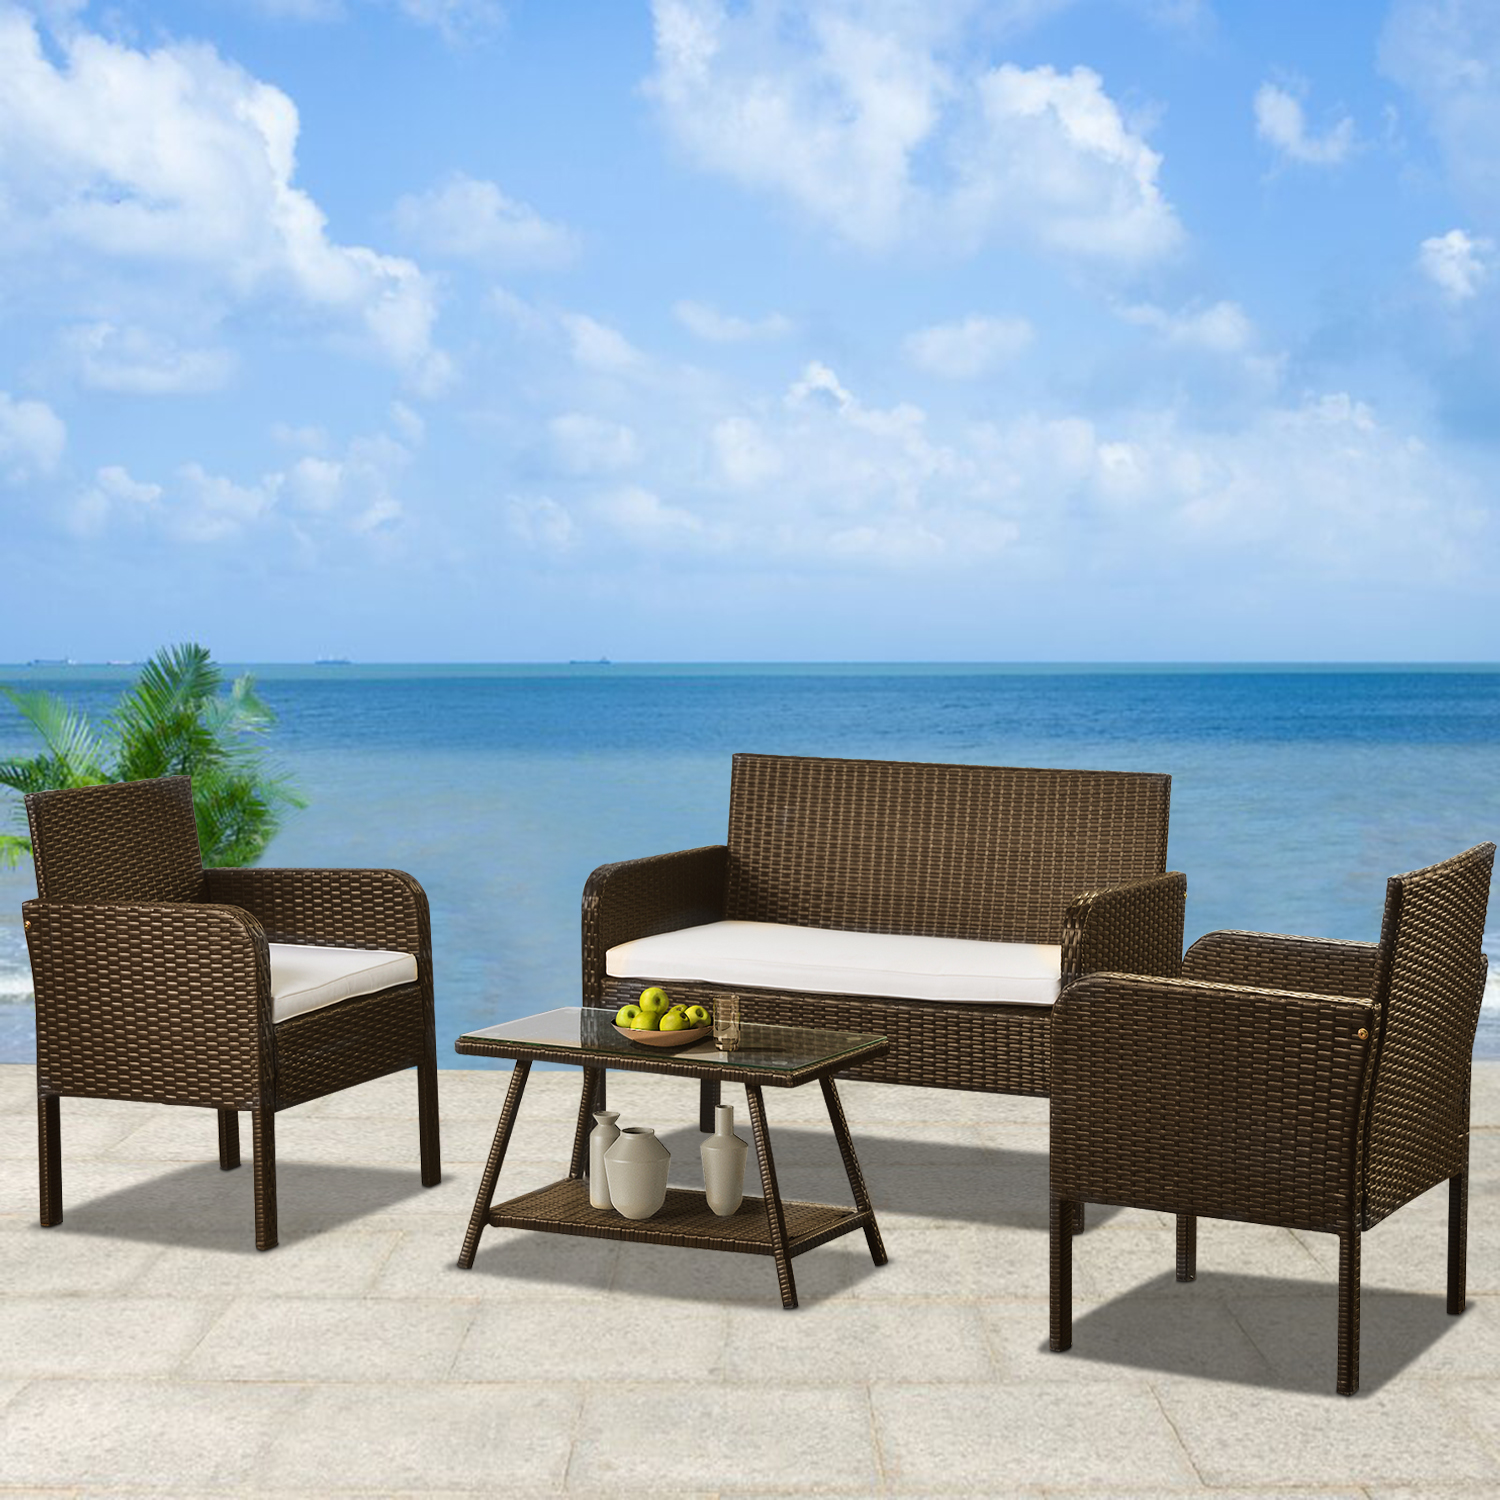 uhomepro 4 Piece Bistro Patio Set, Rattan Wicker Outdoor Patio Furniture with 2pcs Arm Chairs, 1pc Love Seat, Coffee Table Beige, Cushion, Dining Set for Backyard Poolside Garden - image 2 of 7